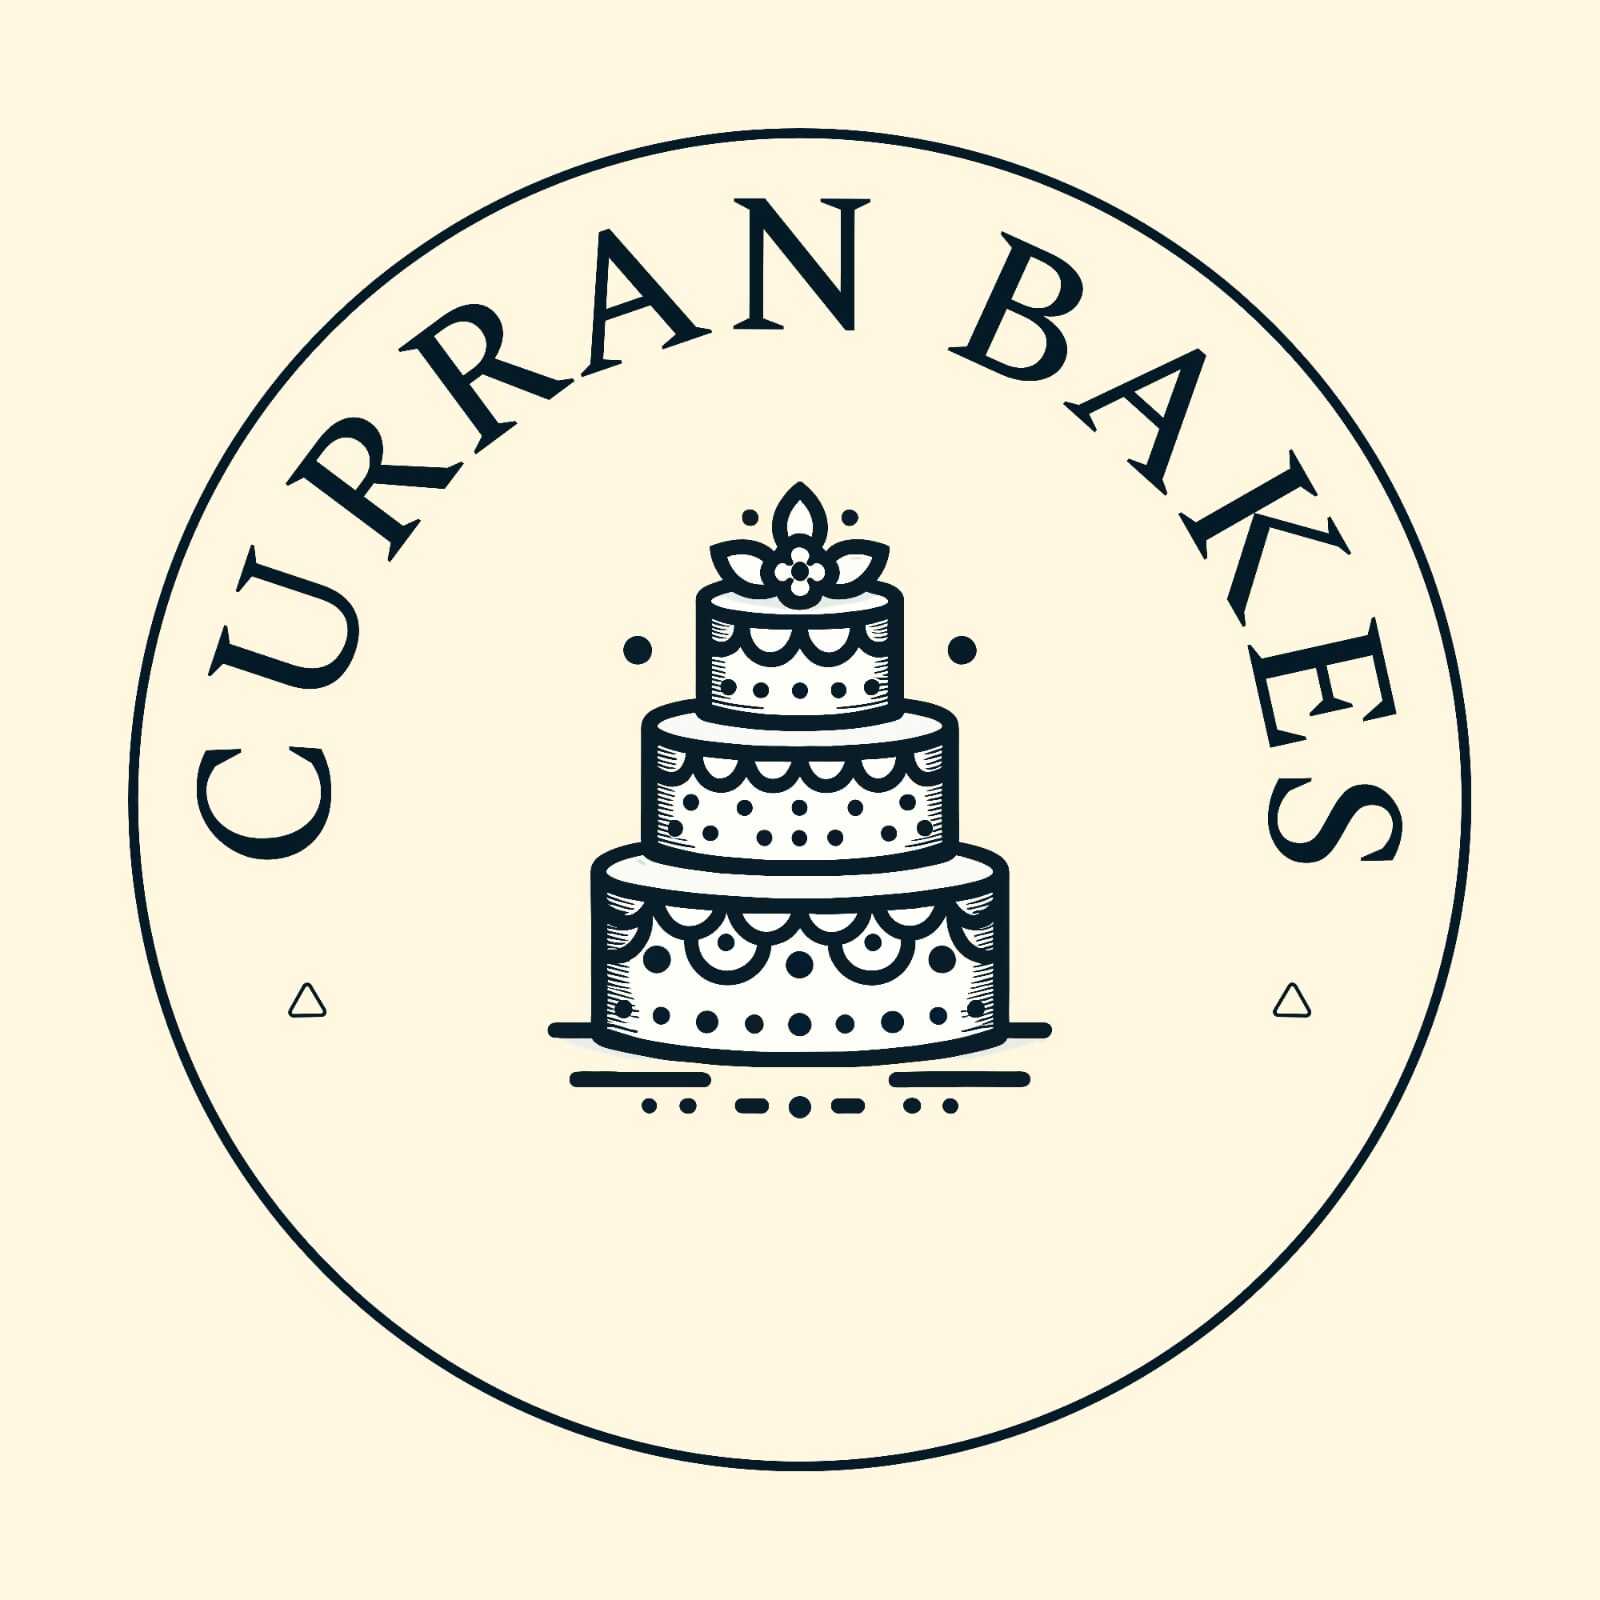 Curran Bakes - Calne, Wiltshire SN11 9RY - 07450 924321 | ShowMeLocal.com